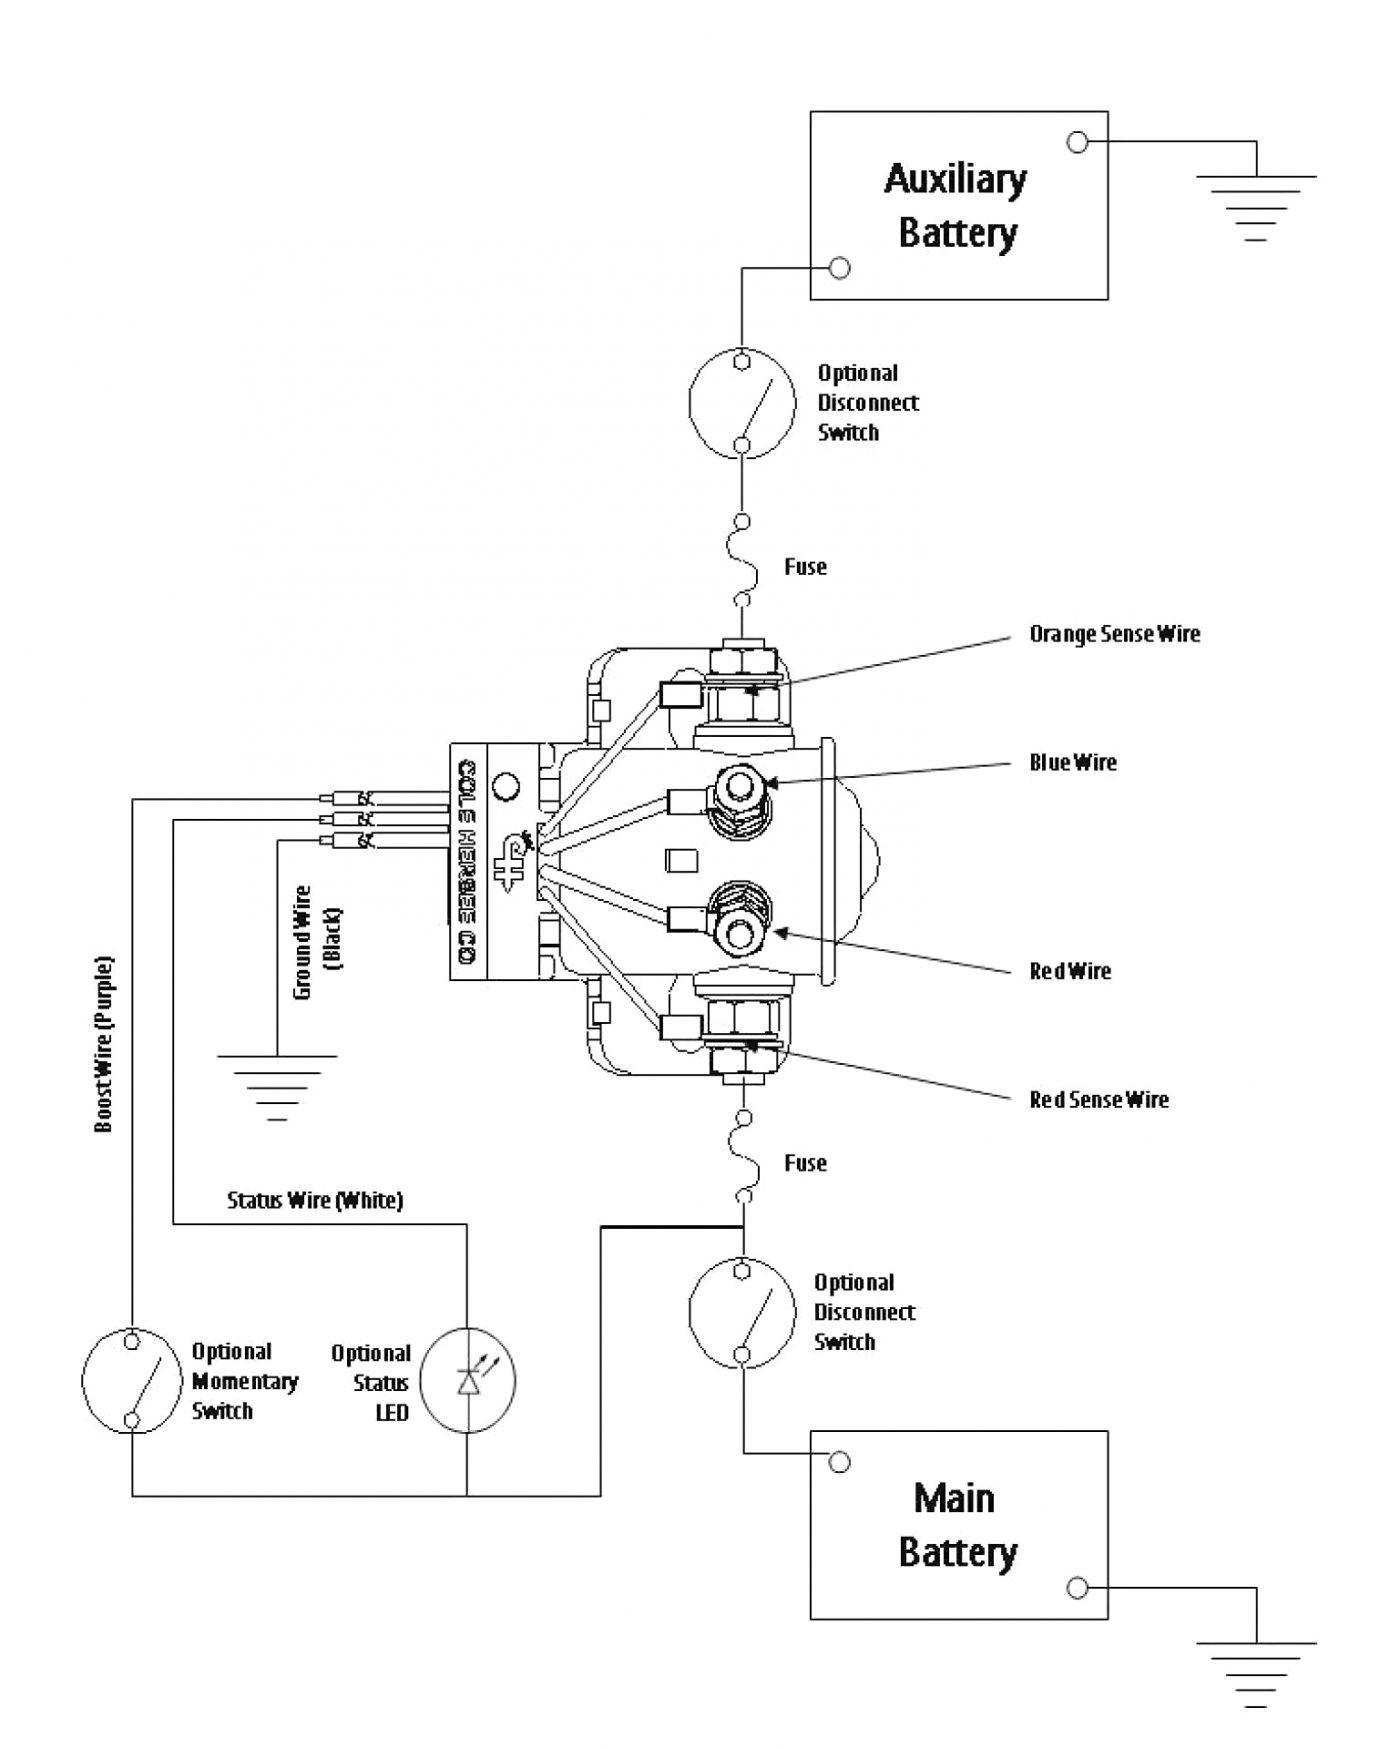 Rotary Switch Wiring Diagram Rate Wiring Diagram Rotary Isolator Switch Refrence Wiring Diagram For